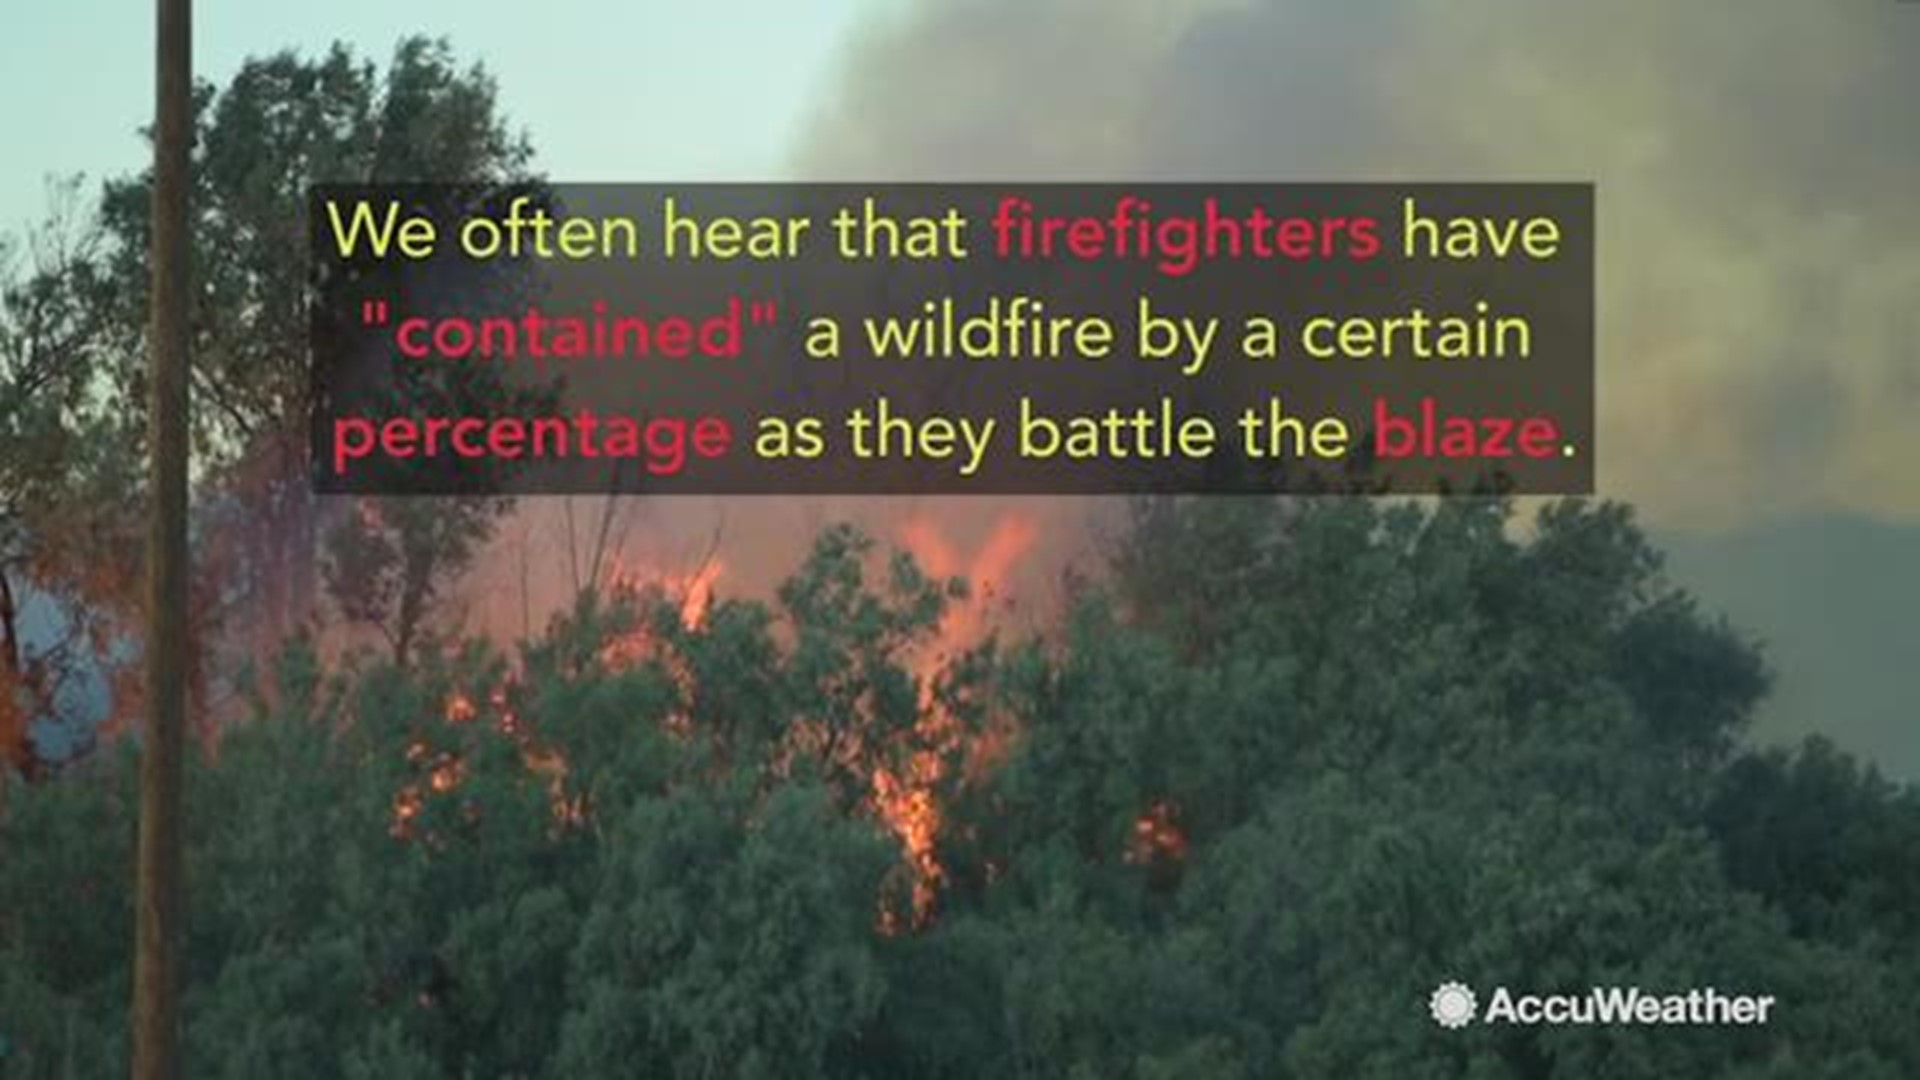 We often hear that firefighters have 'contained' a wildfire by a certain percentage as they battle the blaze. But what does that mean?